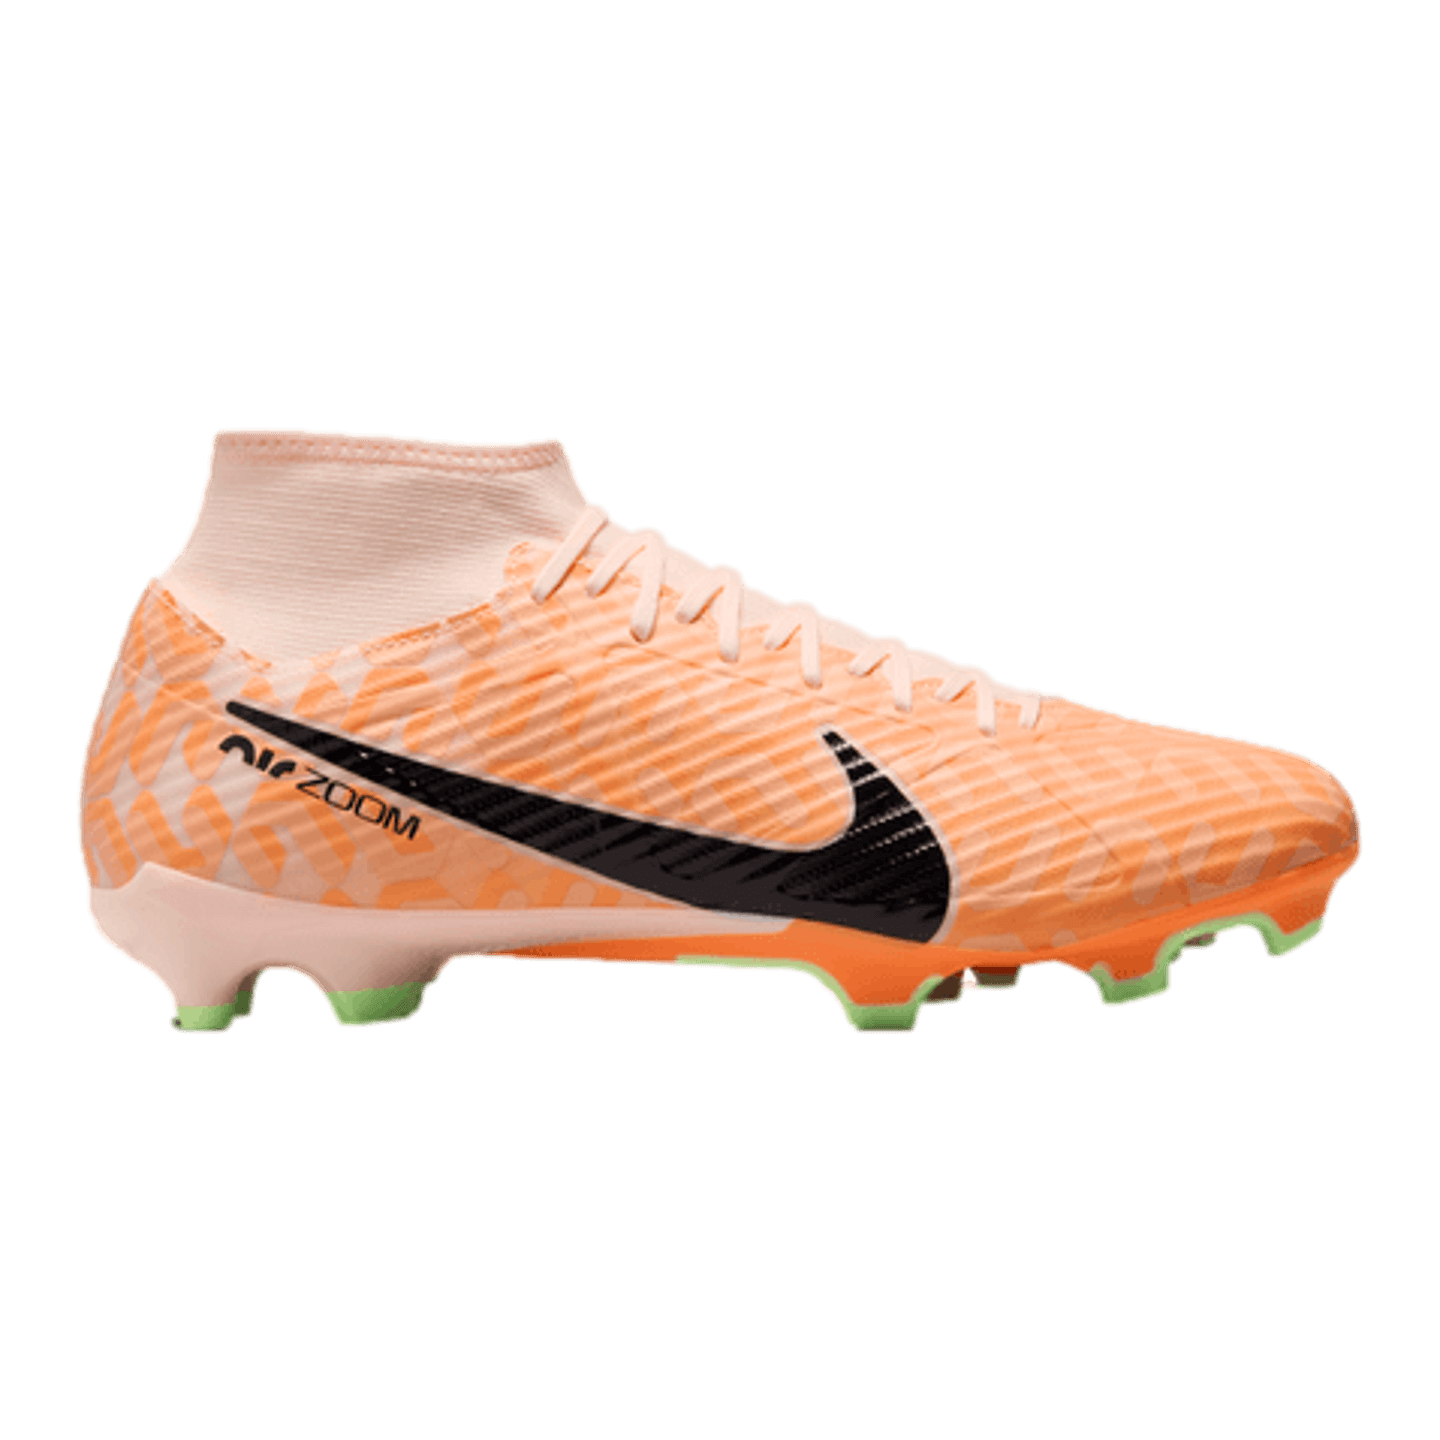 Nike Mercurial Superfly 9 Academy Firm Ground Cleats